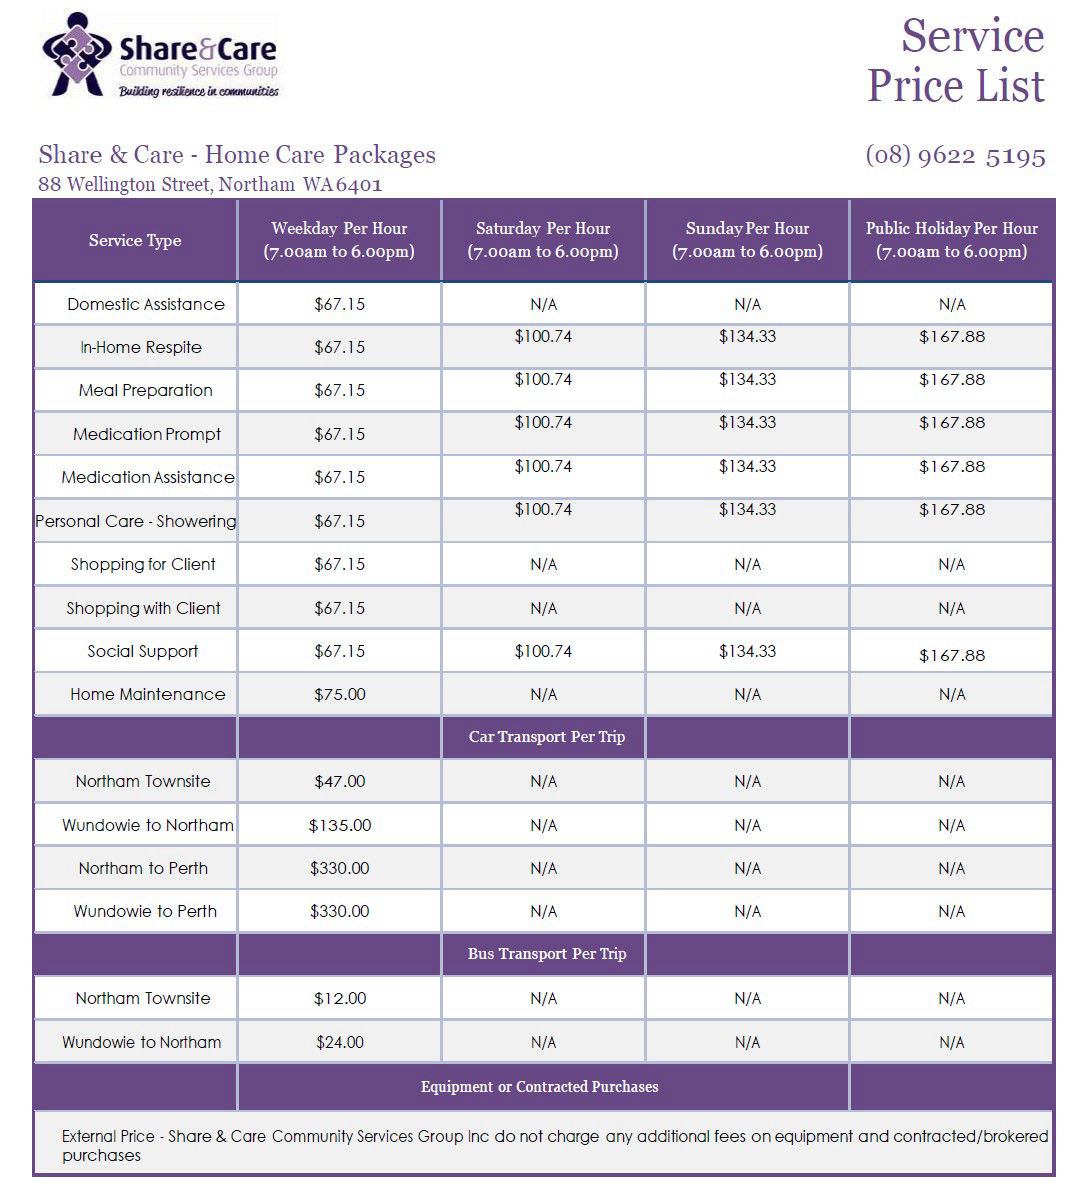 HCP pricing